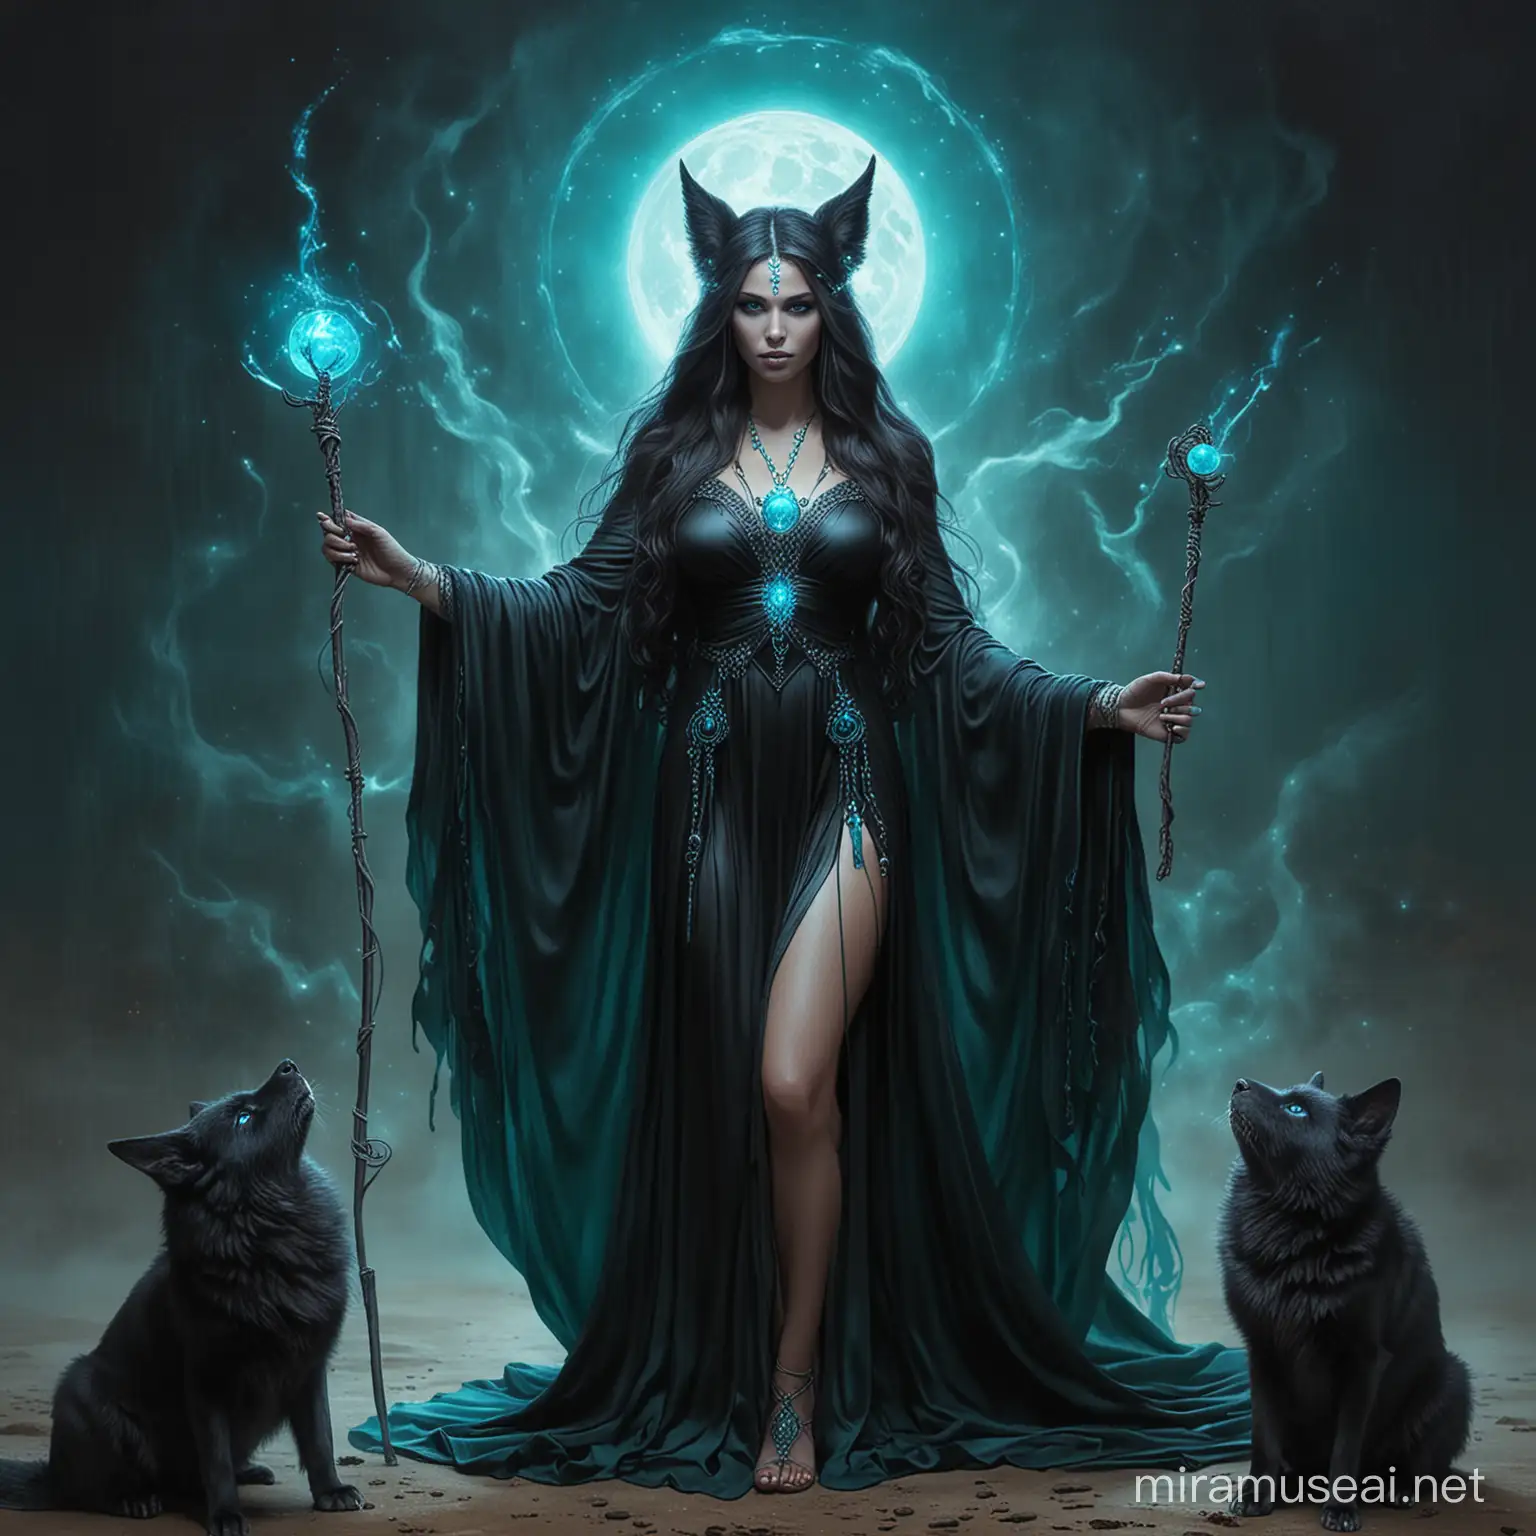 Dark Magic Goddess with Turquoise Orb and Vixens